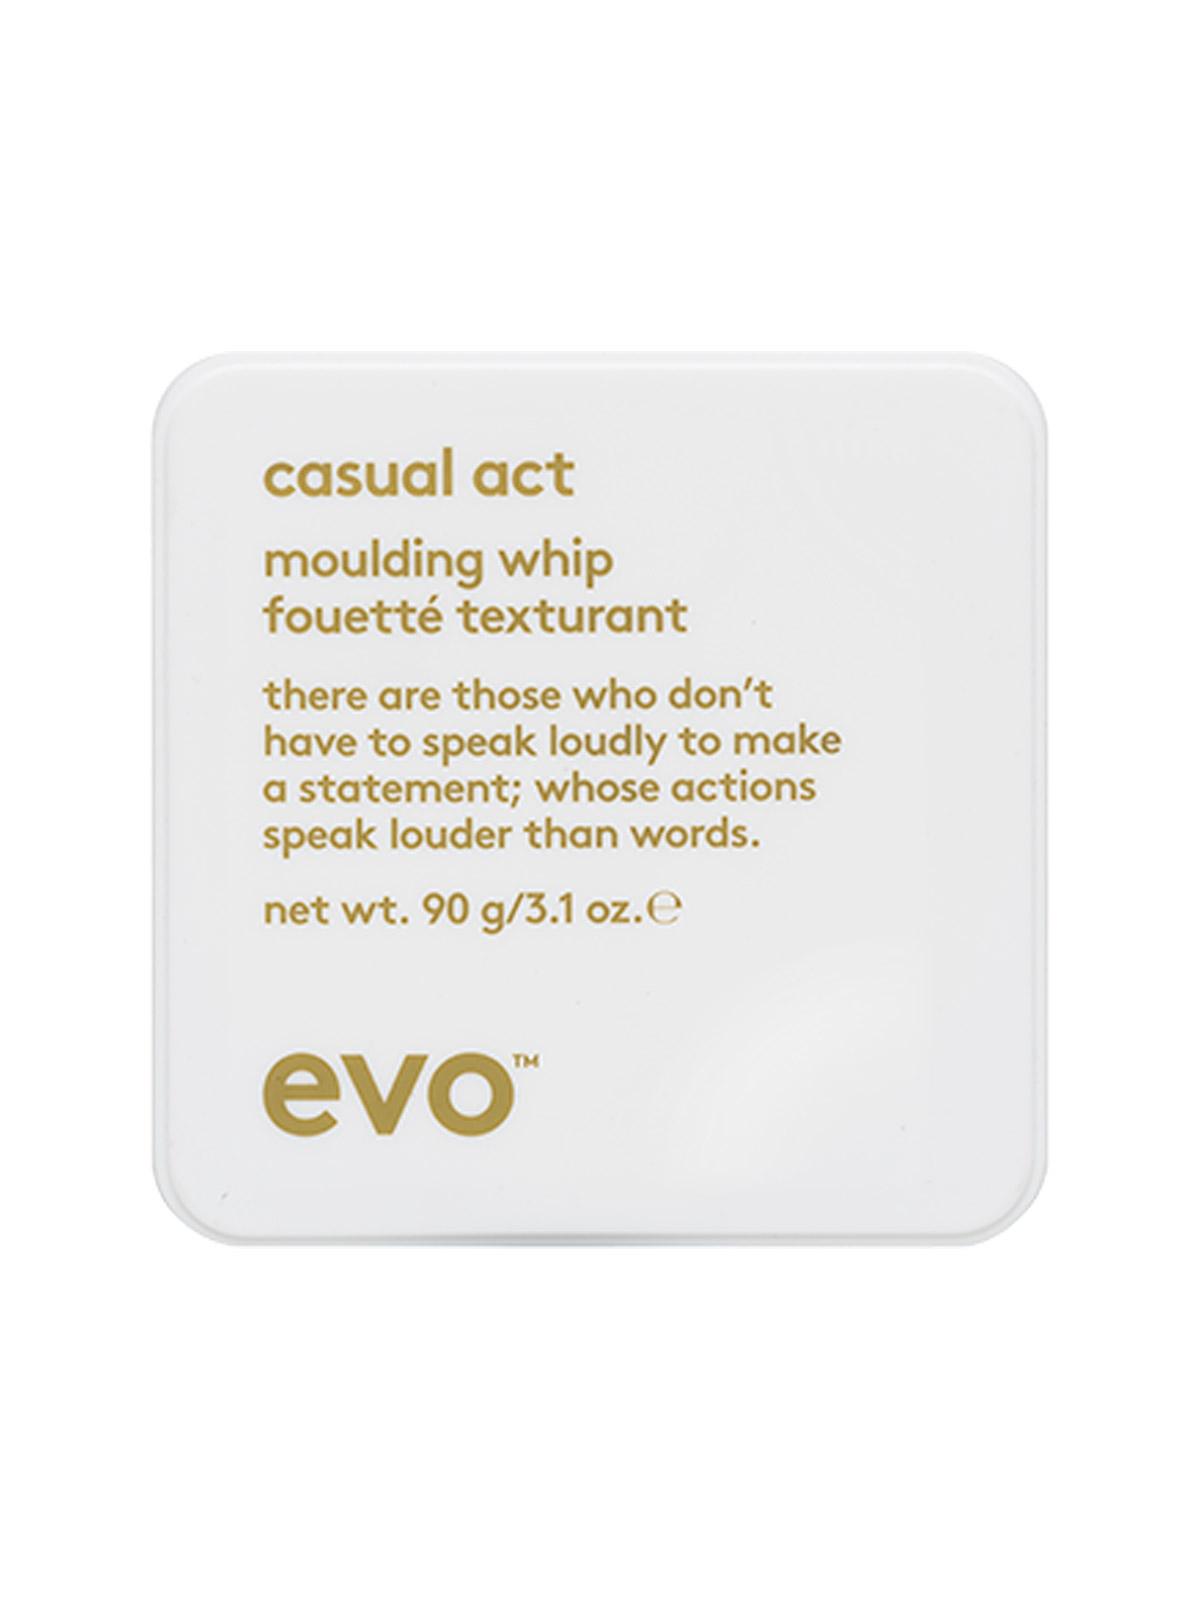 EVO Casual Act Moulding Whip